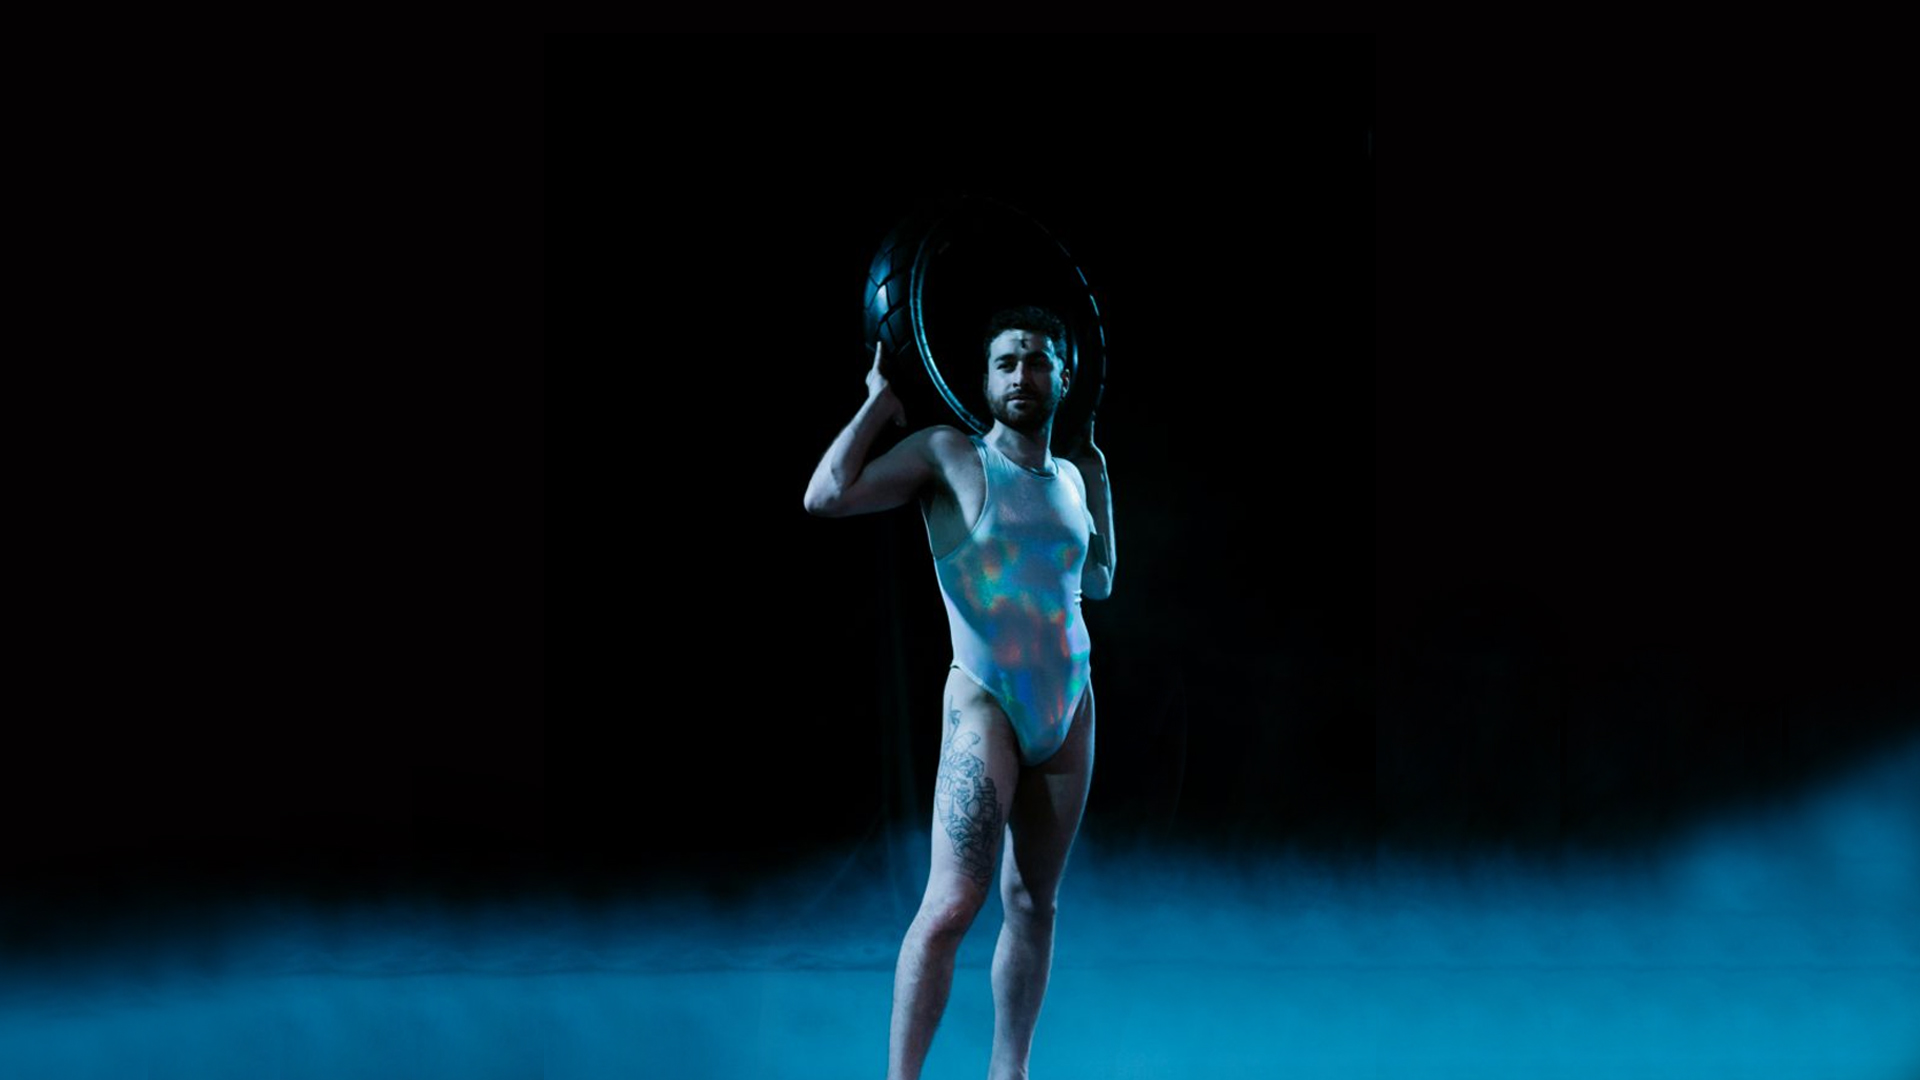 Action shot of a male dancer on stage during a performance.